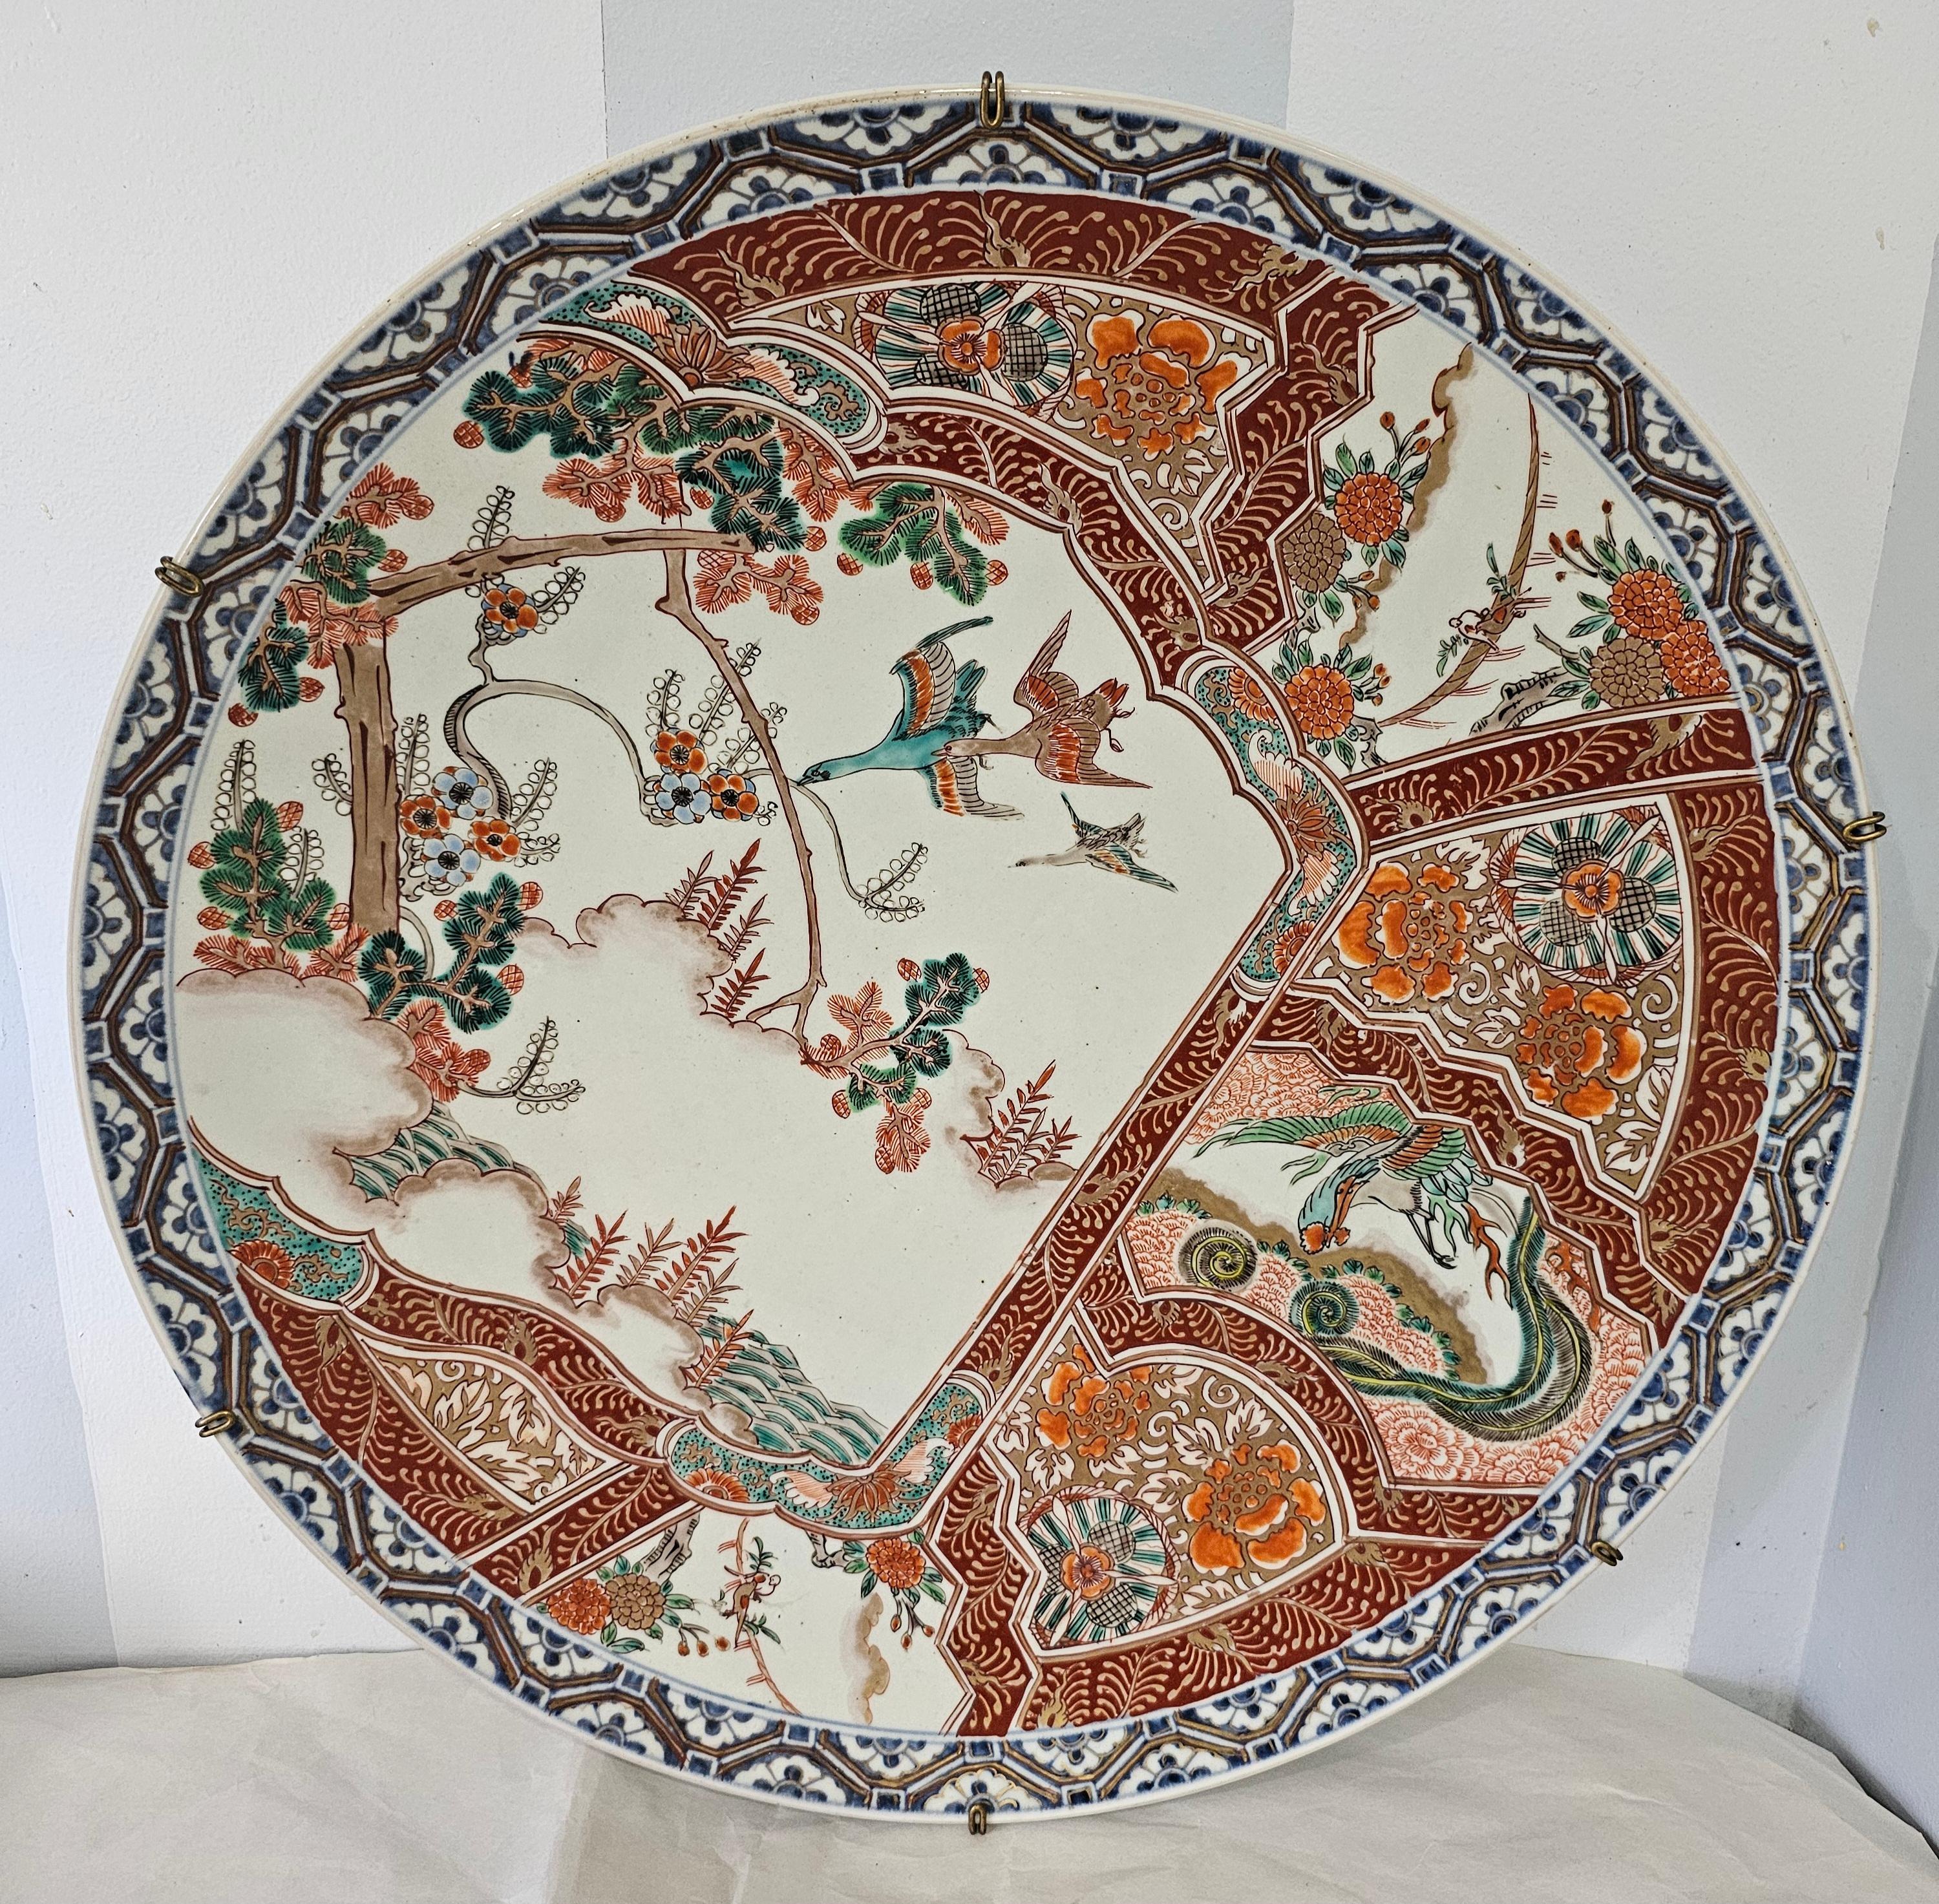 19th Century Extra Large Japanese Decorated Wall Platter In Fair Condition For Sale In Germantown, MD